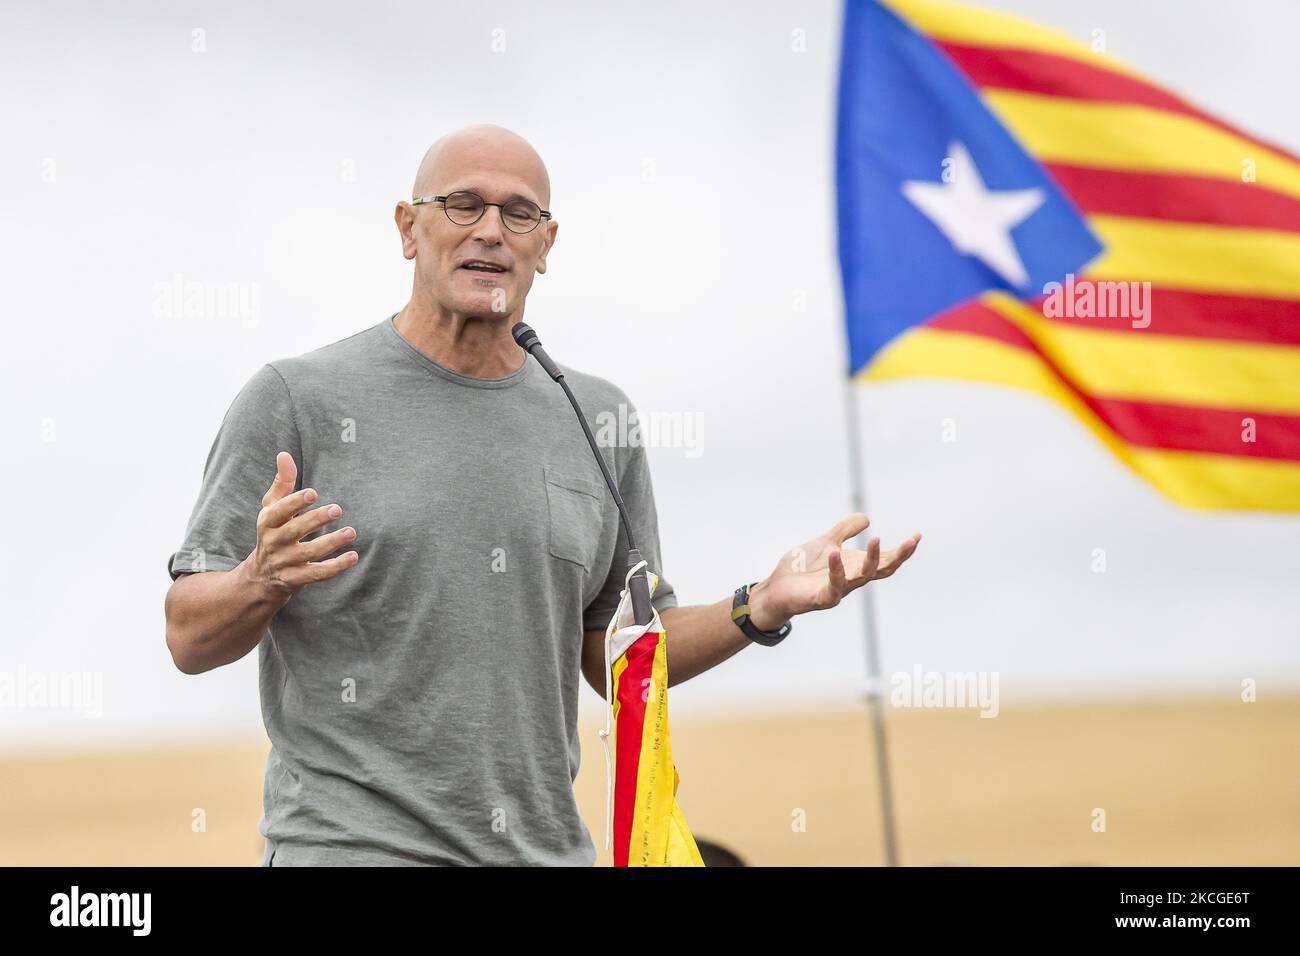 Catalan leader Raül Romeva in front of the Lledoners prison after the Spanish government announced a pardon for those who participated in Catalonia's failed 2017 independence bid, Sant Joan de Vilatorrada, near Barcelona, Catalonia, Spain on June 23, 2021 (Photo by Albert Llop/NurPhoto) Stock Photo